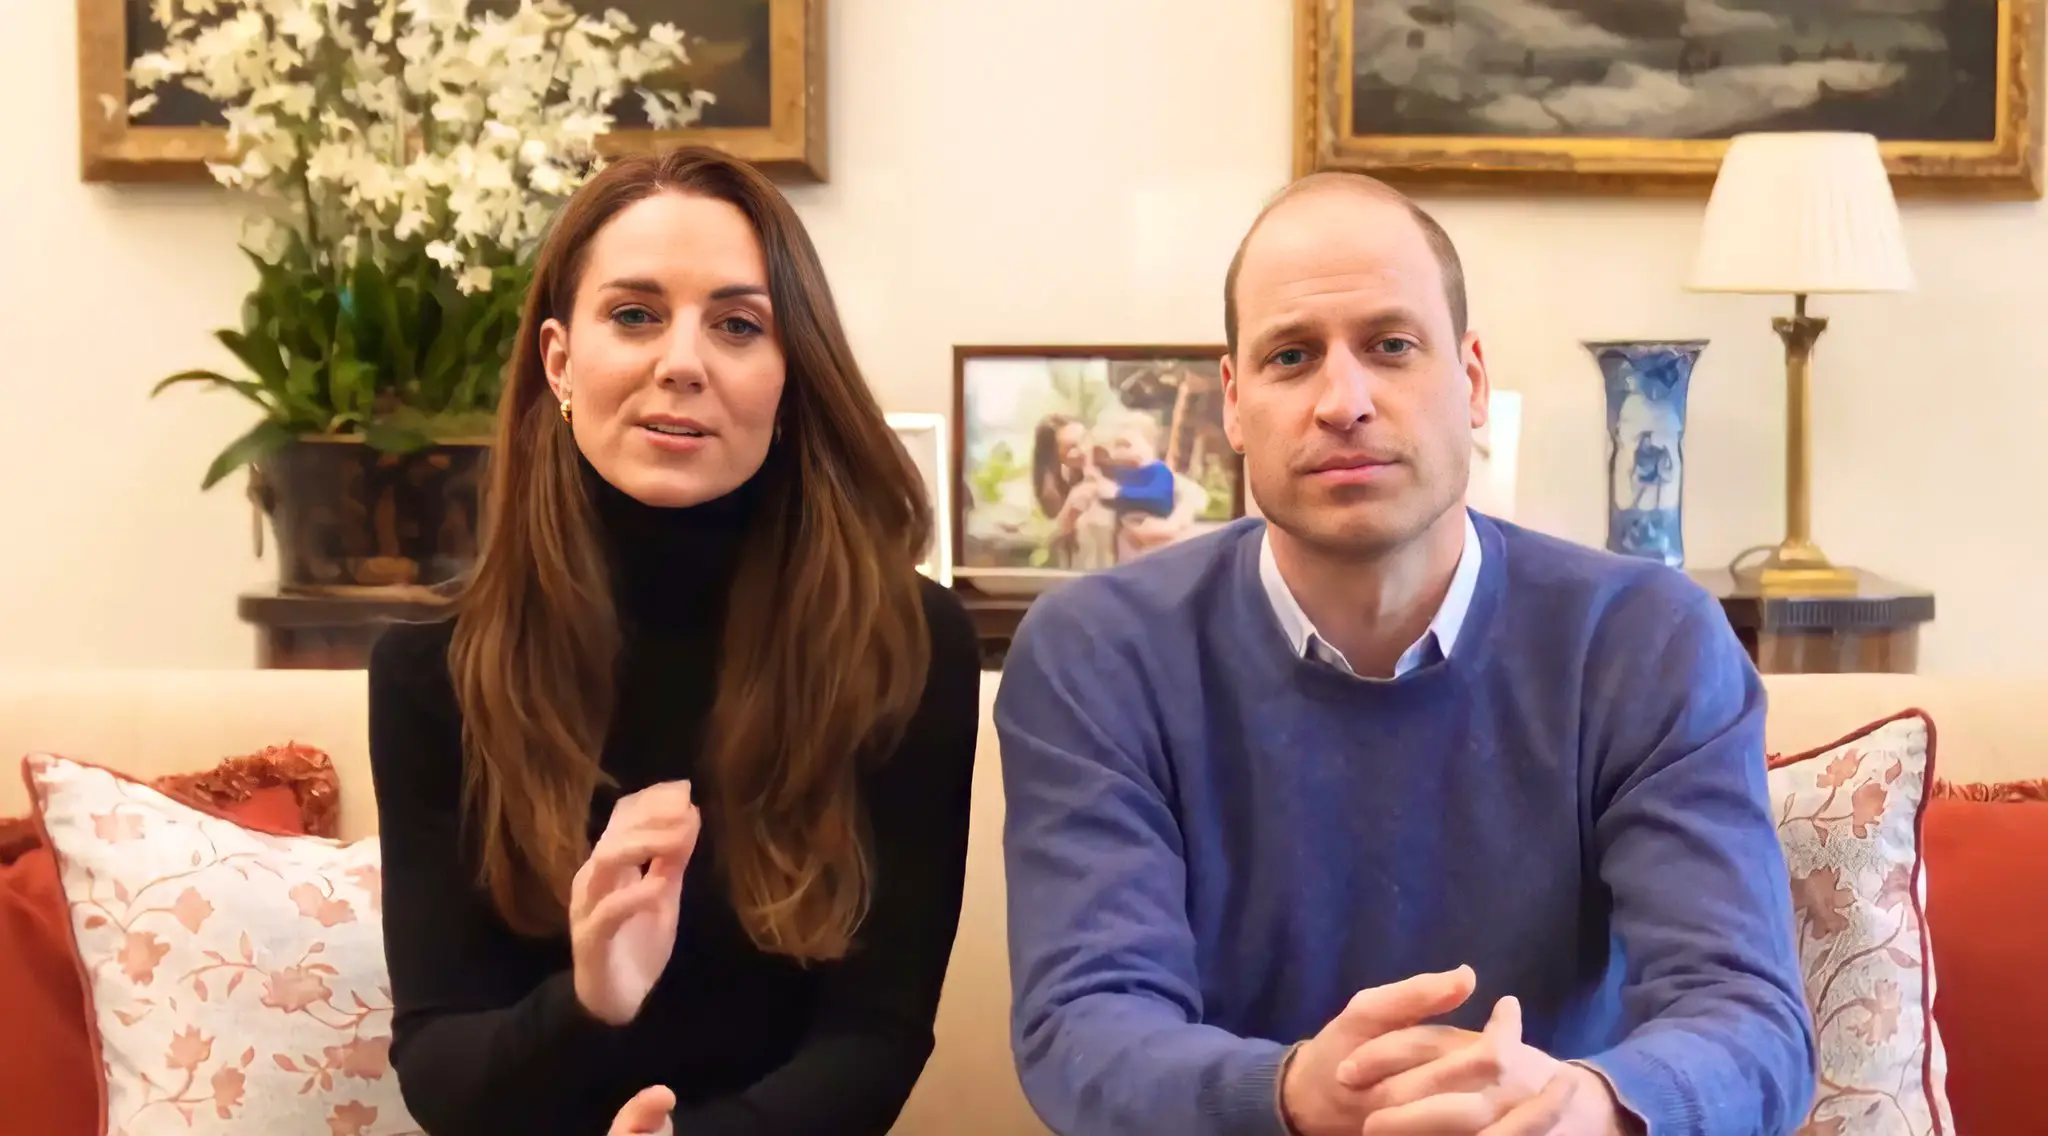 The Duke and Duchess of Cambridge released a video message thanking everyone who has been part of Time to Change’s campaign to end mental health stigma